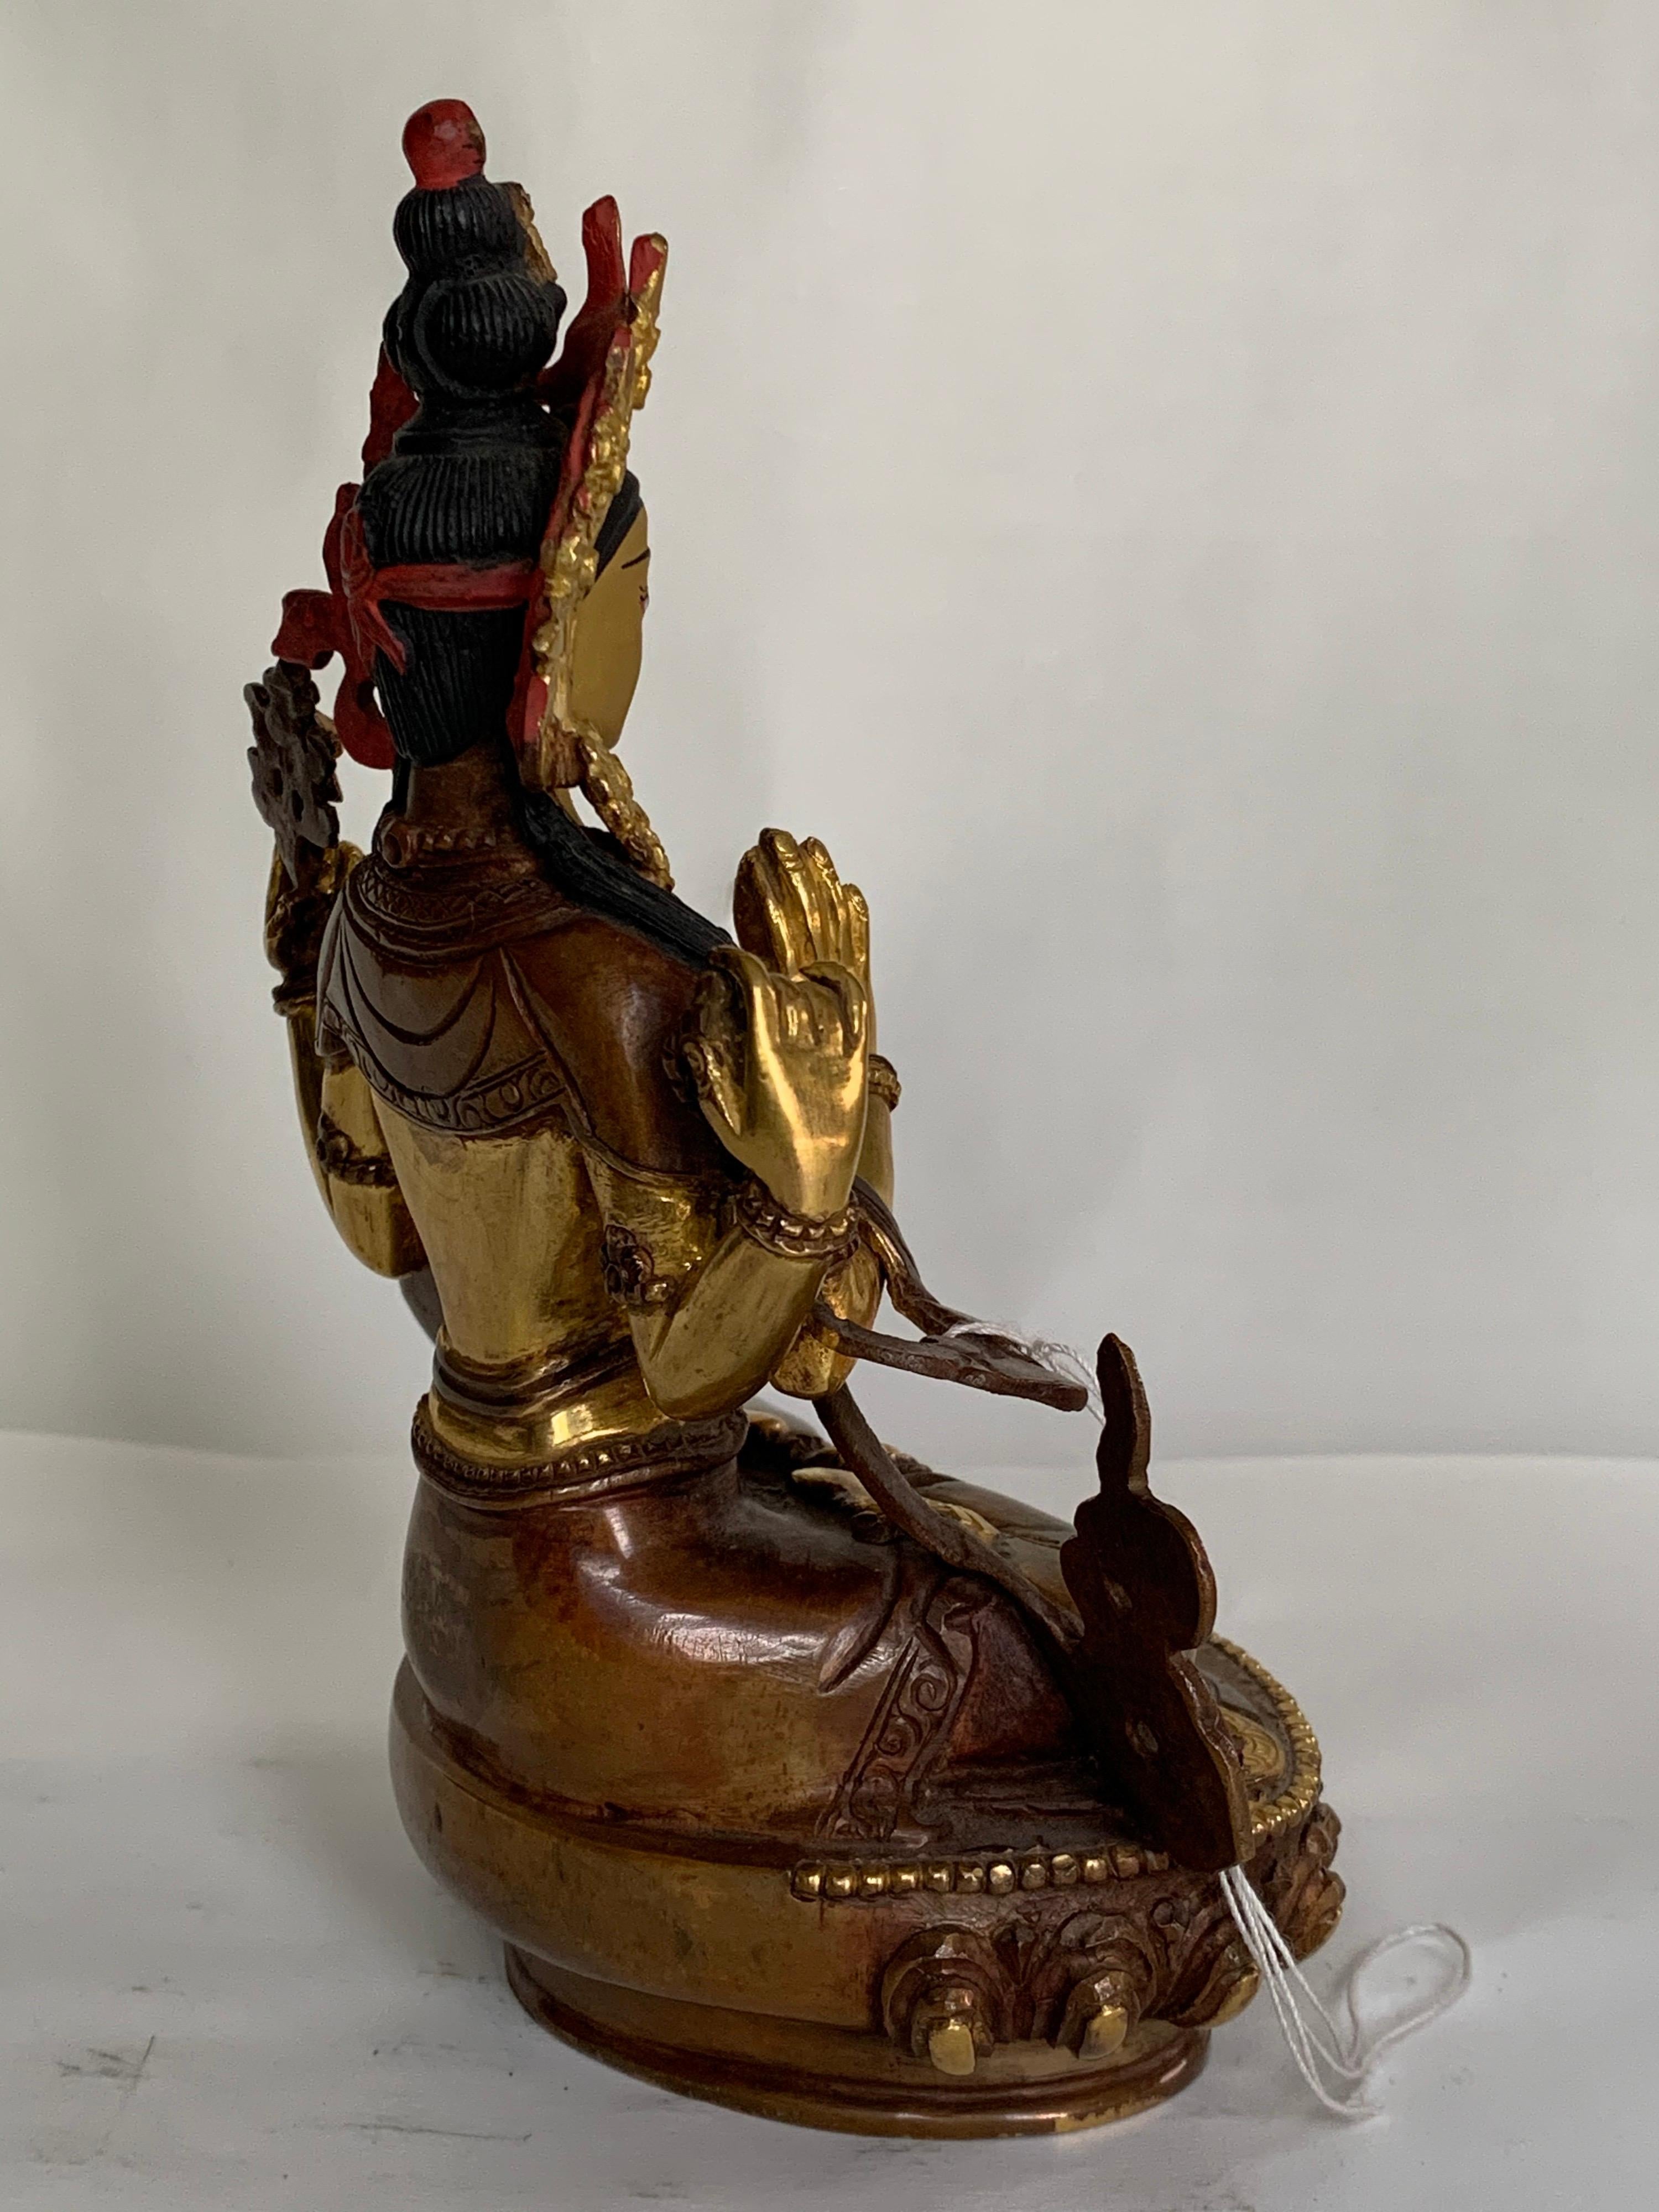 Chengrishi Statue 6 Inch with 24K Gold Handcrafted by Lost Wax Process - Other Art Style Sculpture by Unknown